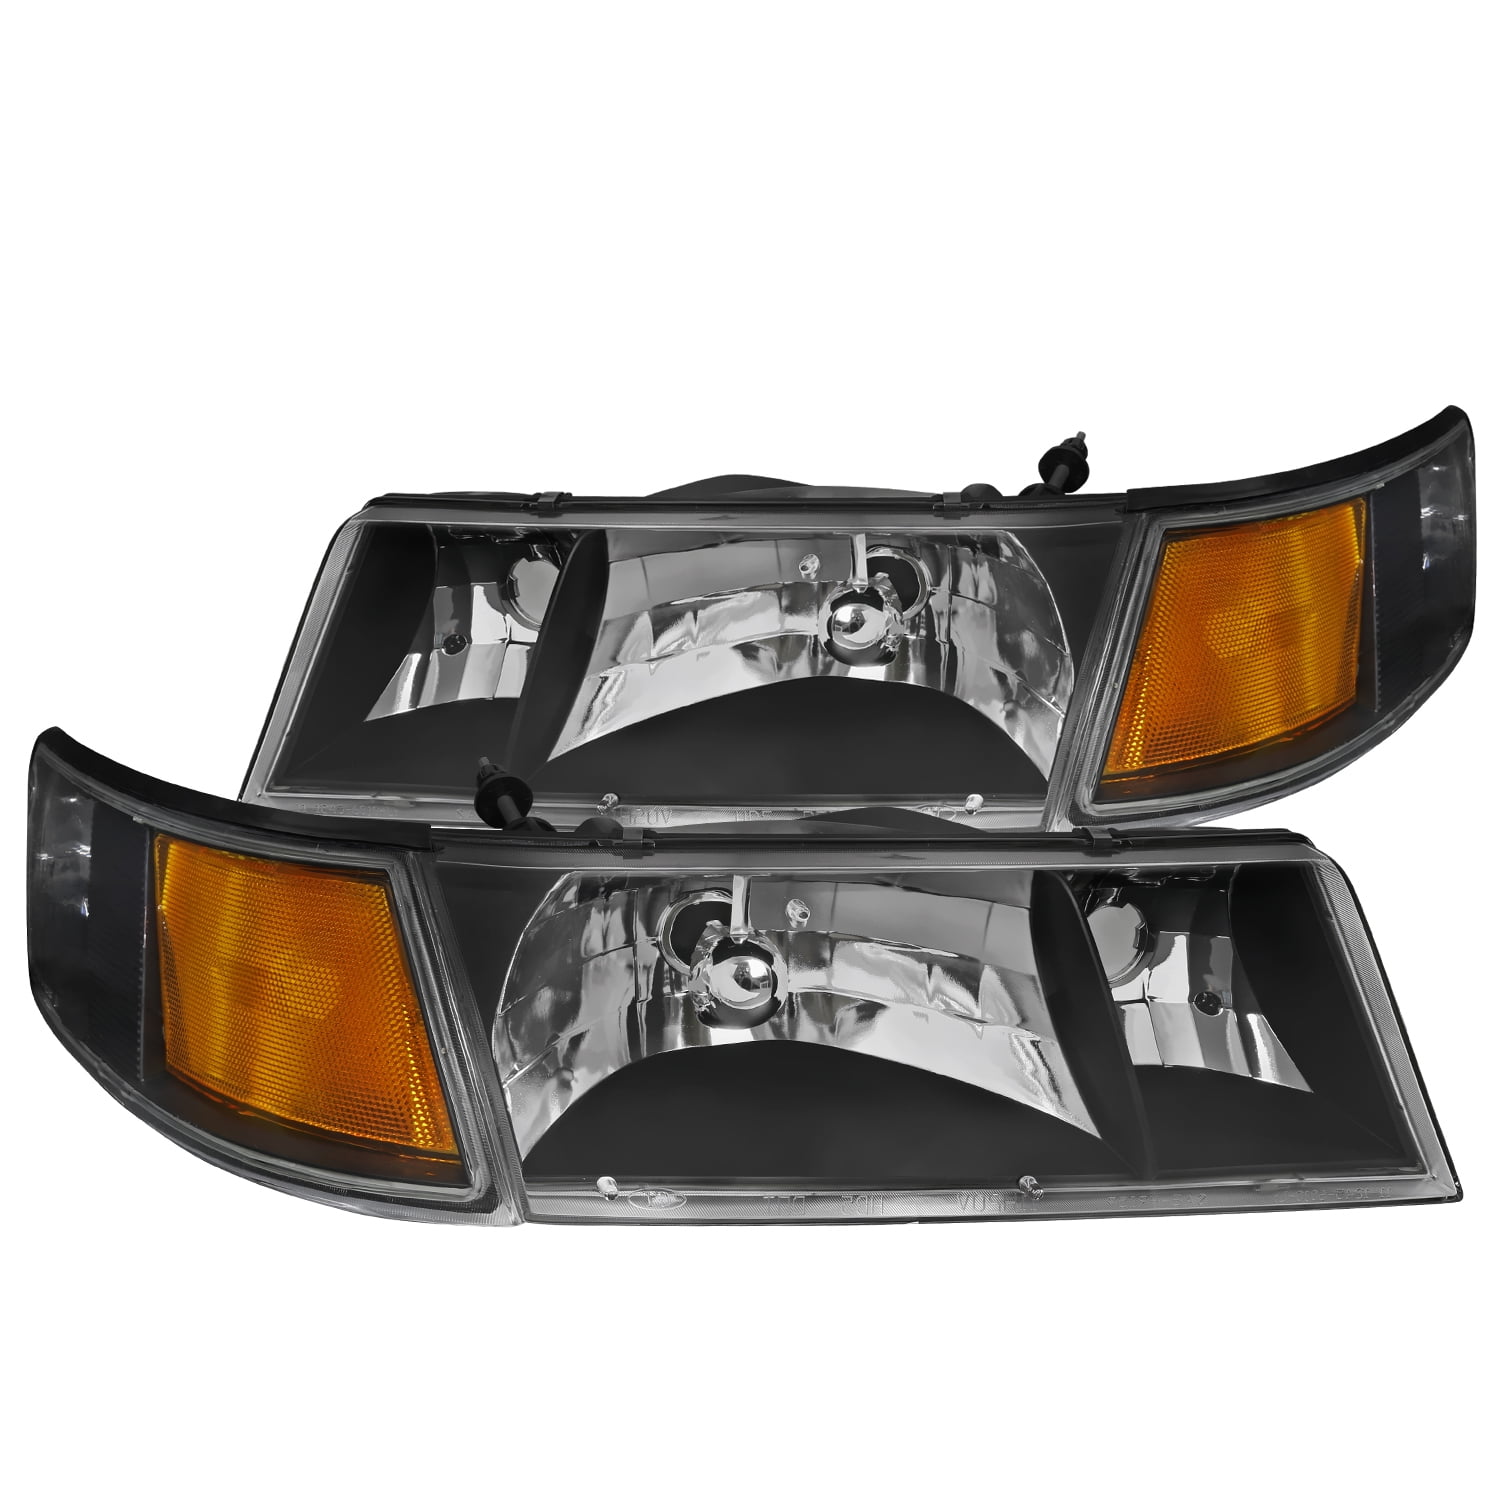 Spec-D Tuning for Mercury Grand Marquis Chrome Clear Headlights+Corner Signal Lamps 4PC 